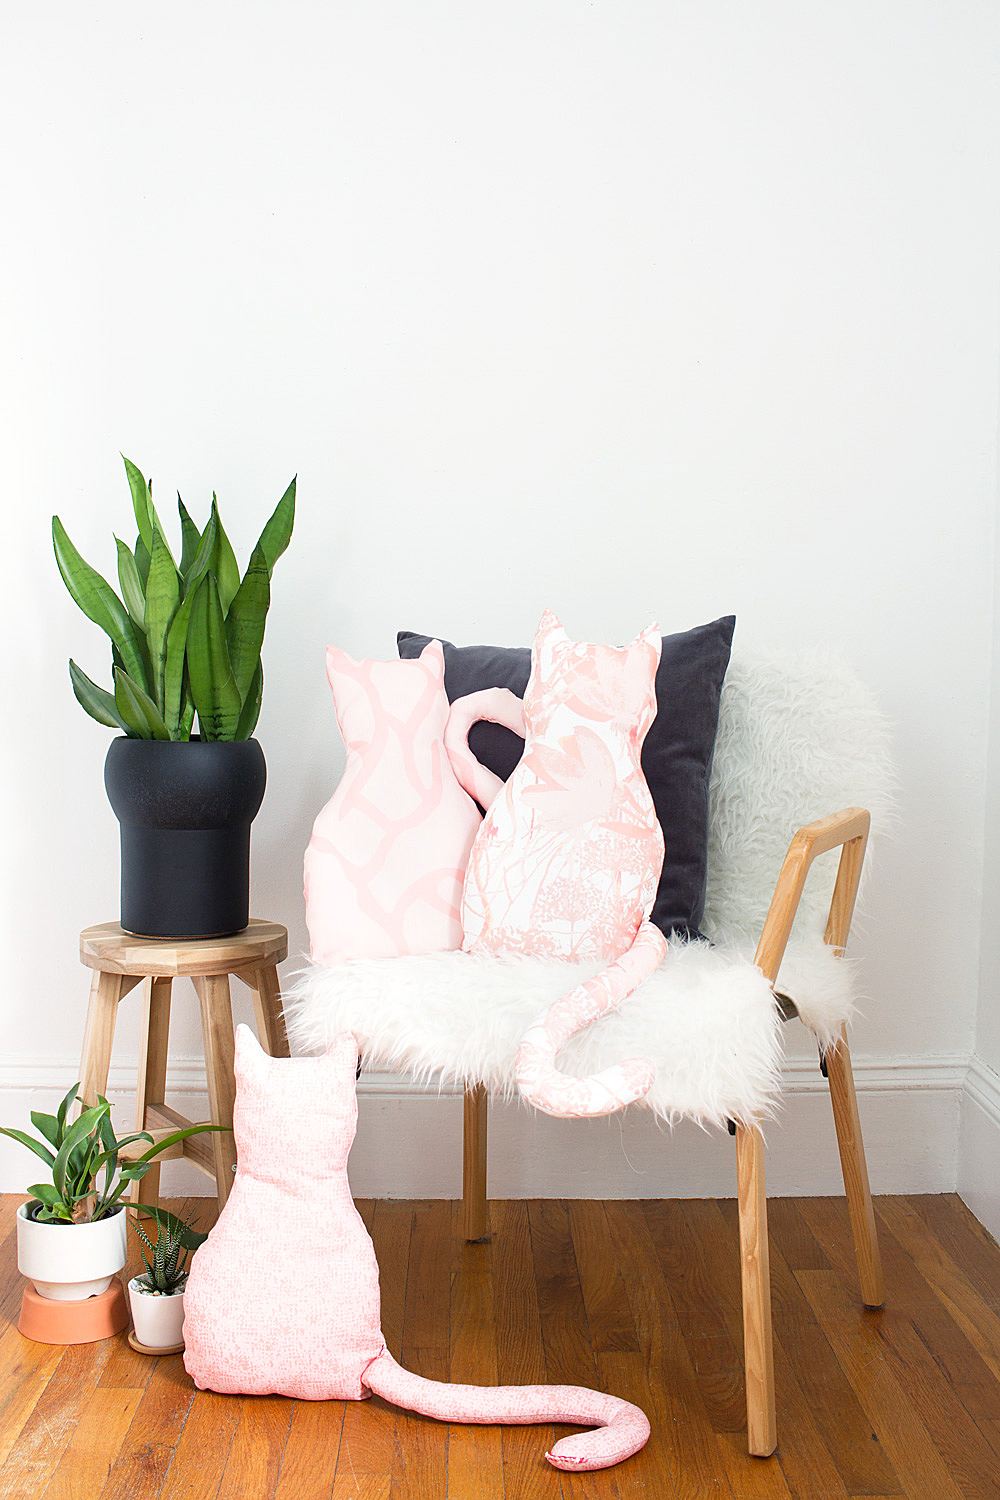 DIY Fur Pillow - How to Sew with Faux Fur for your living room!